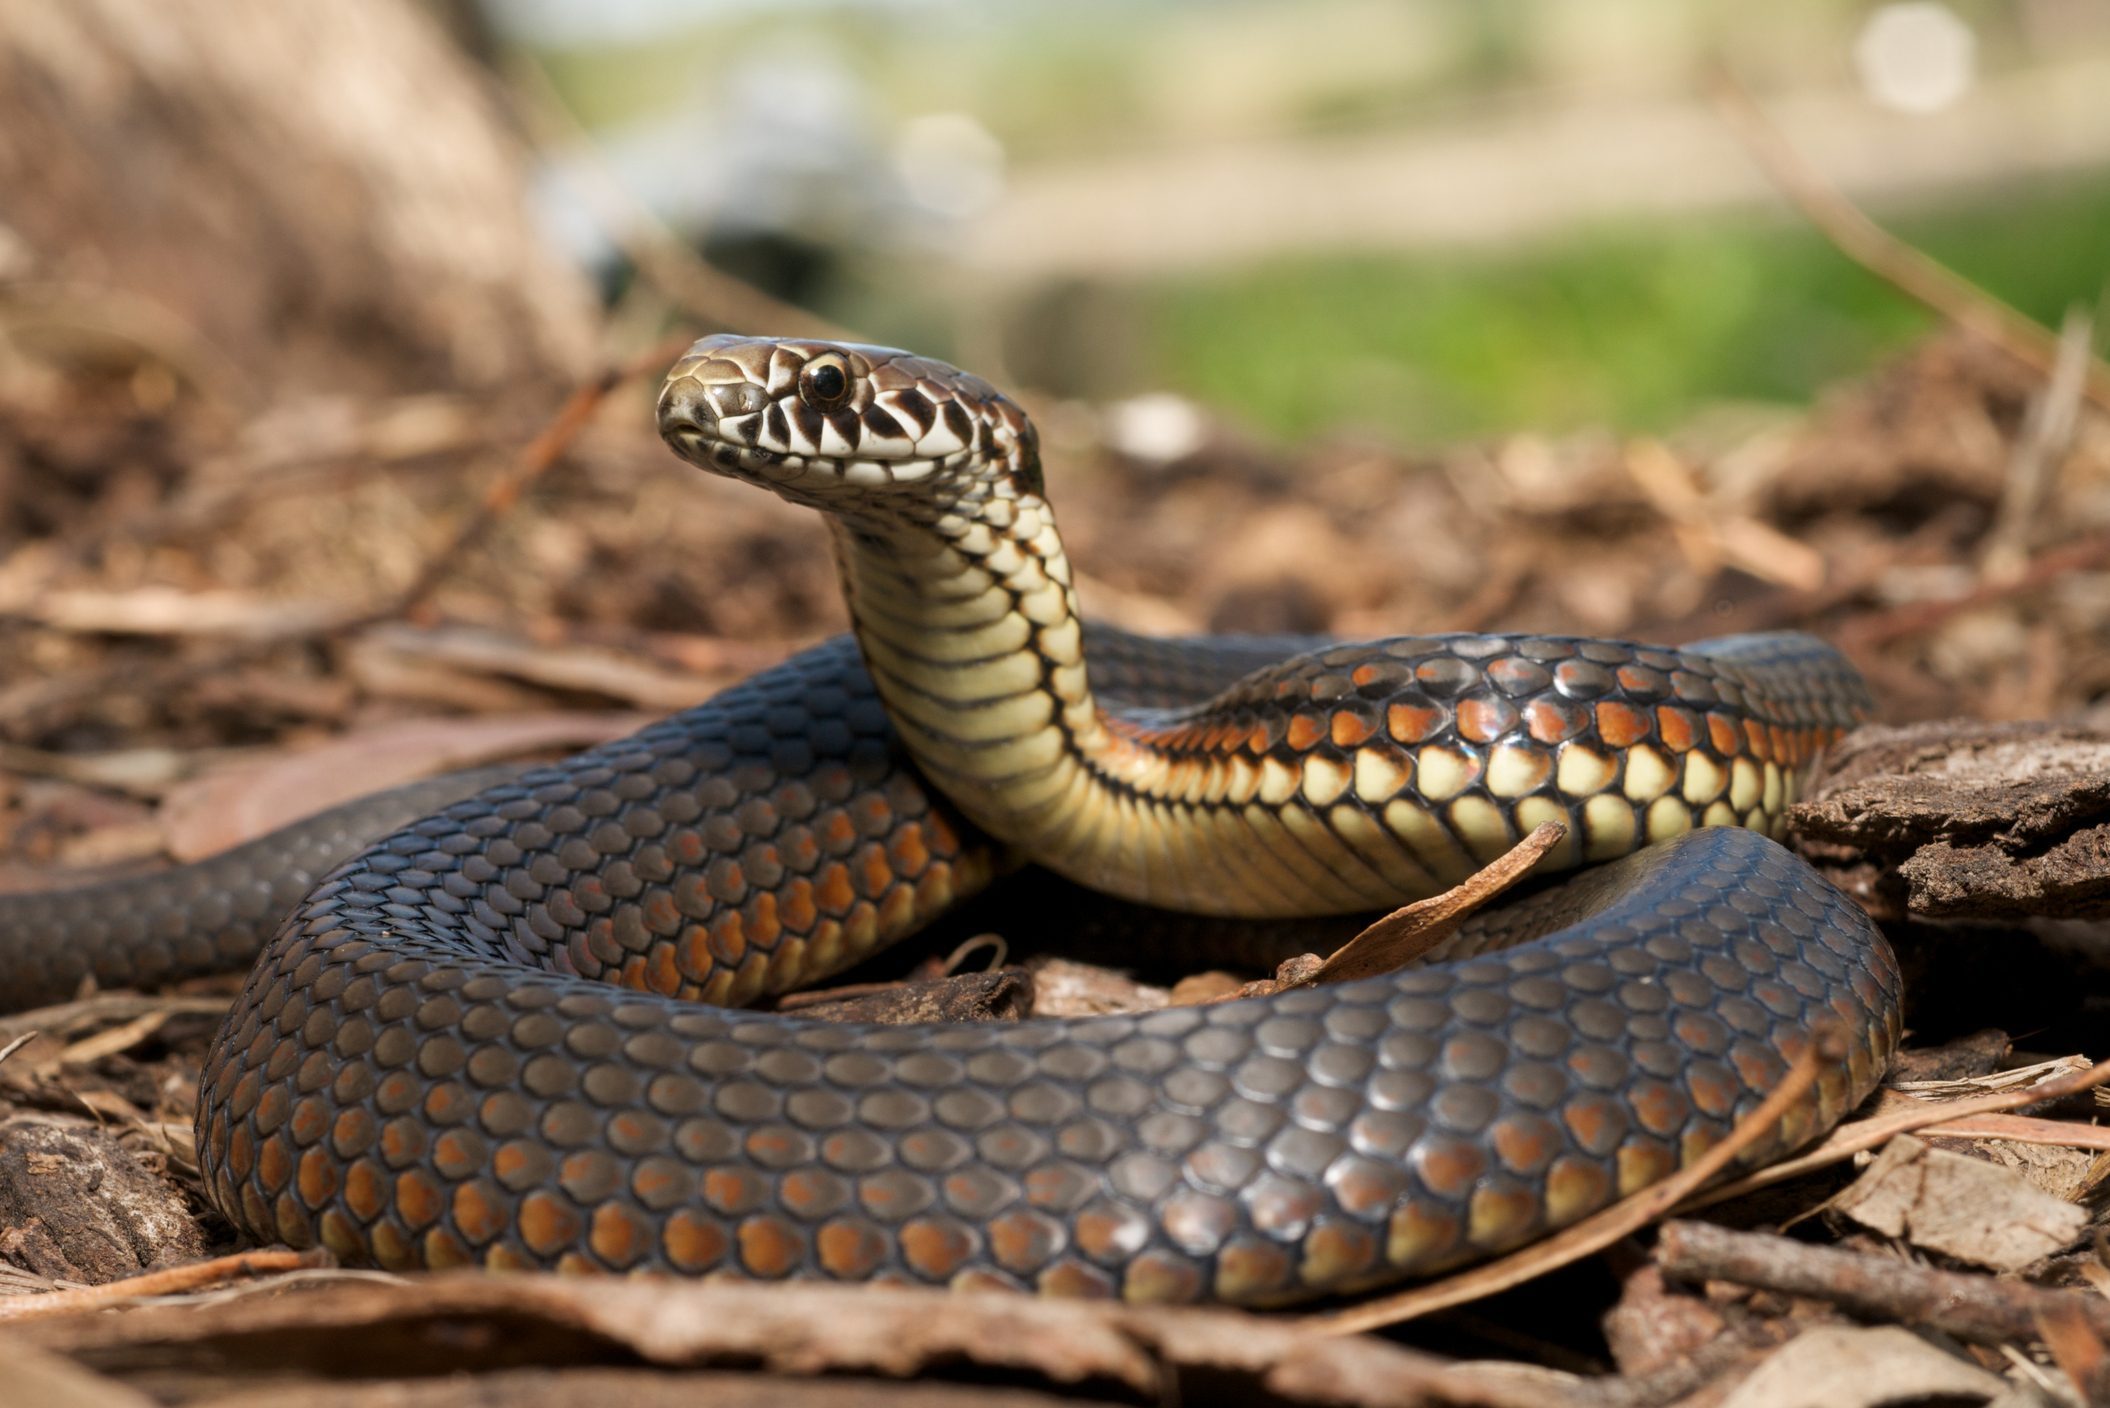 3 Safety Tips If You See a Snake Near Your Camp